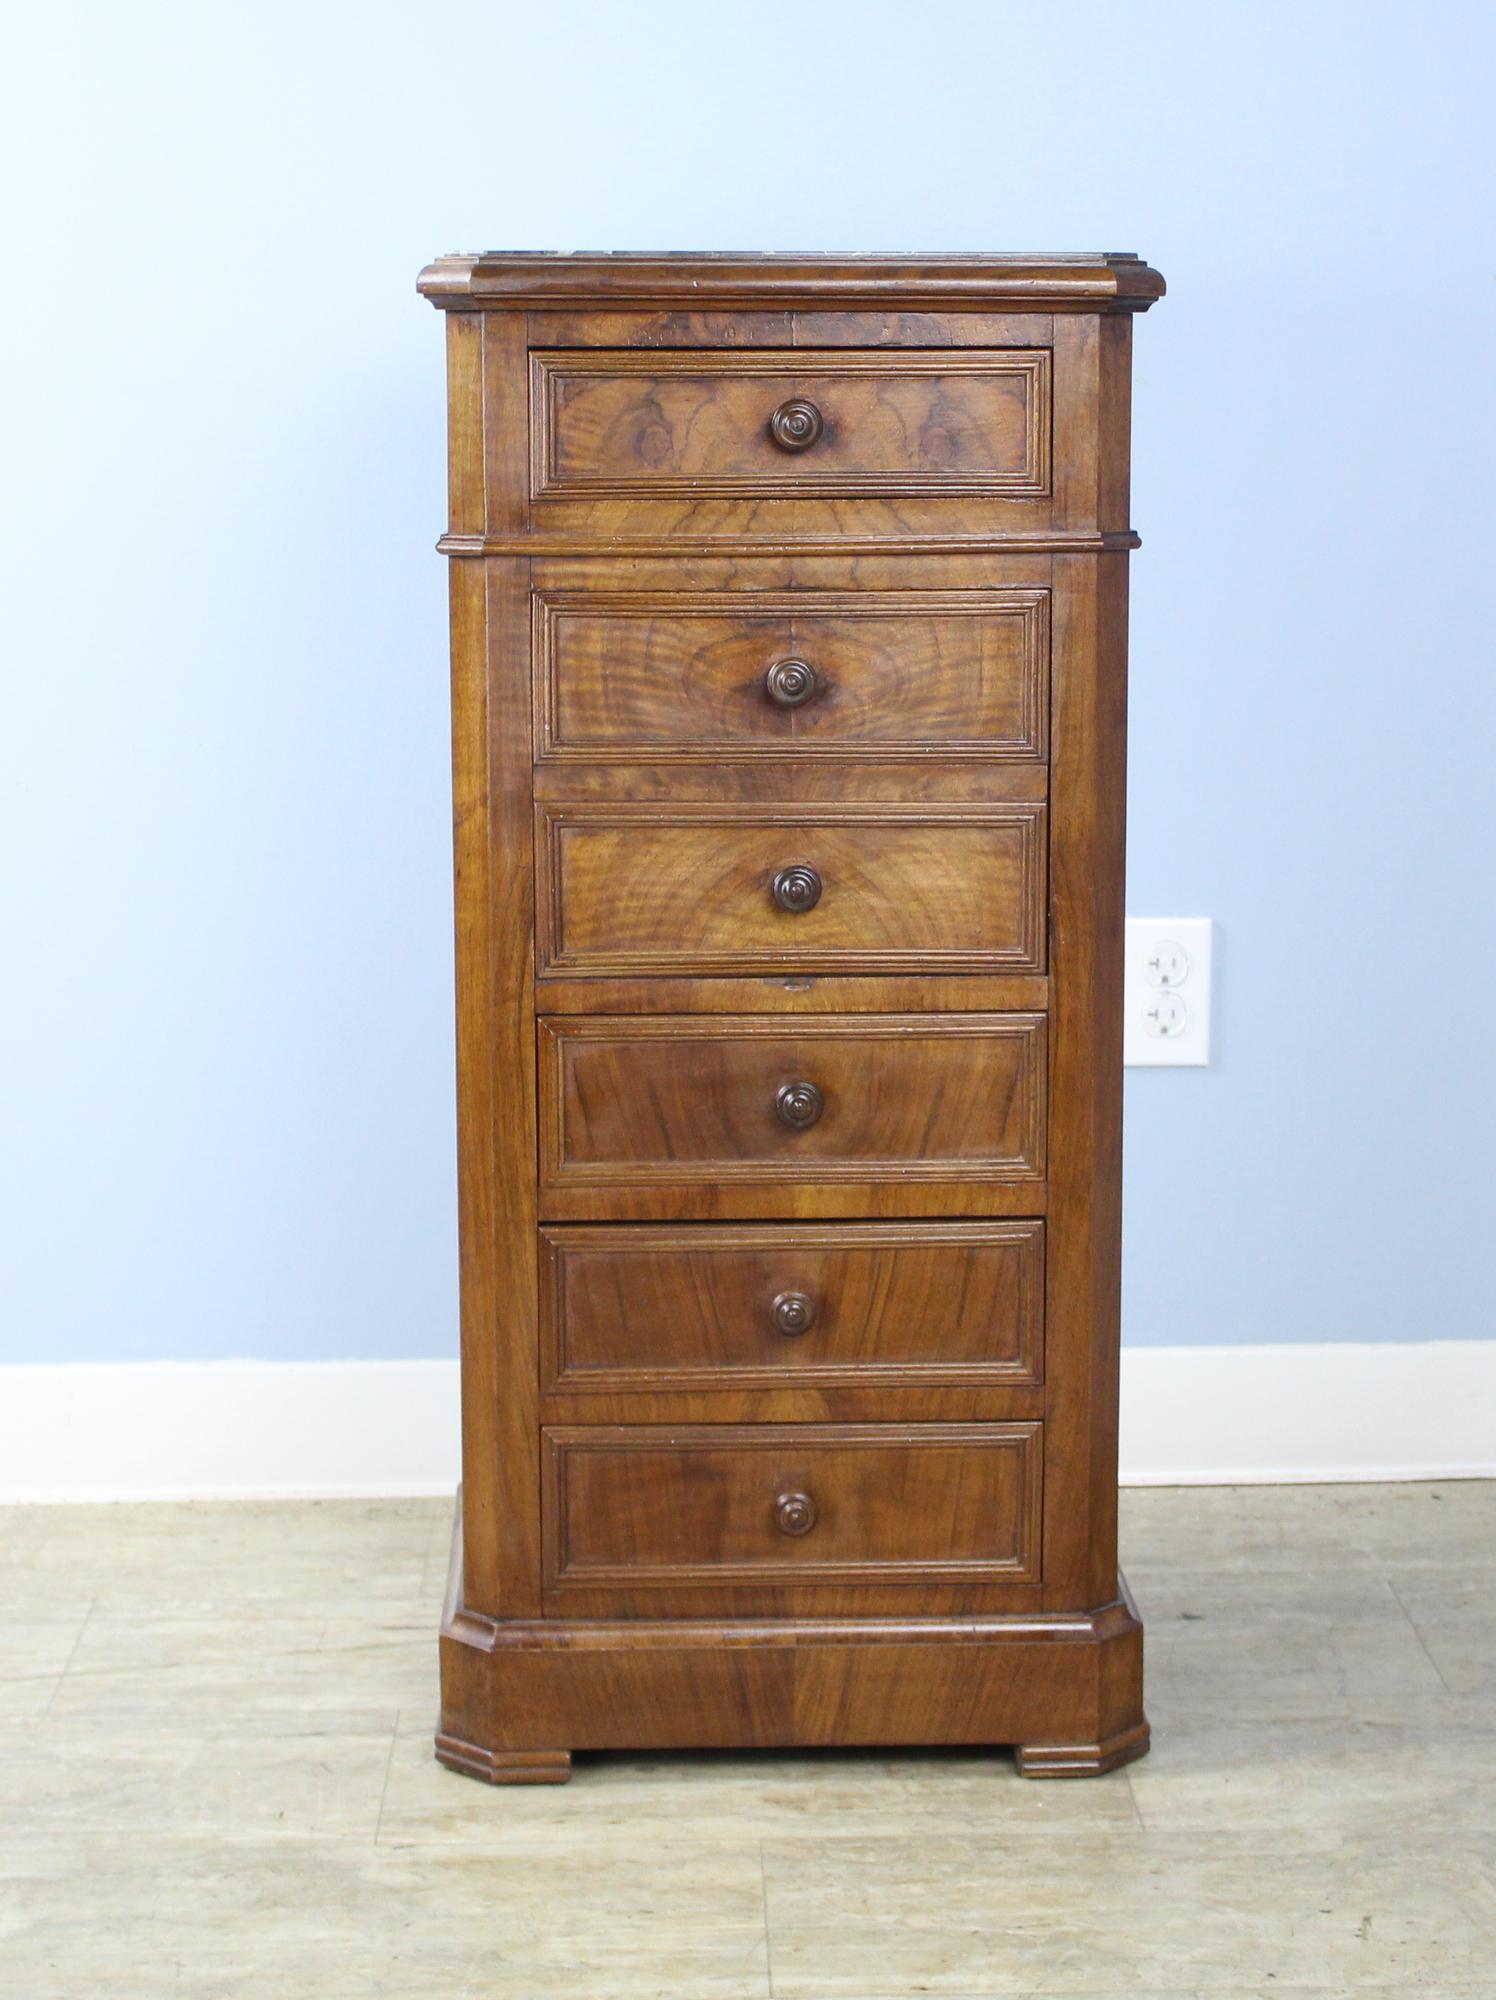 A handsome small cabinet or nightstand in mid walnut with its original light gray marble top. Although this piece appears to have six drawers, the second two are actually the door to a drop down cupboard which provides nice storage. There are four